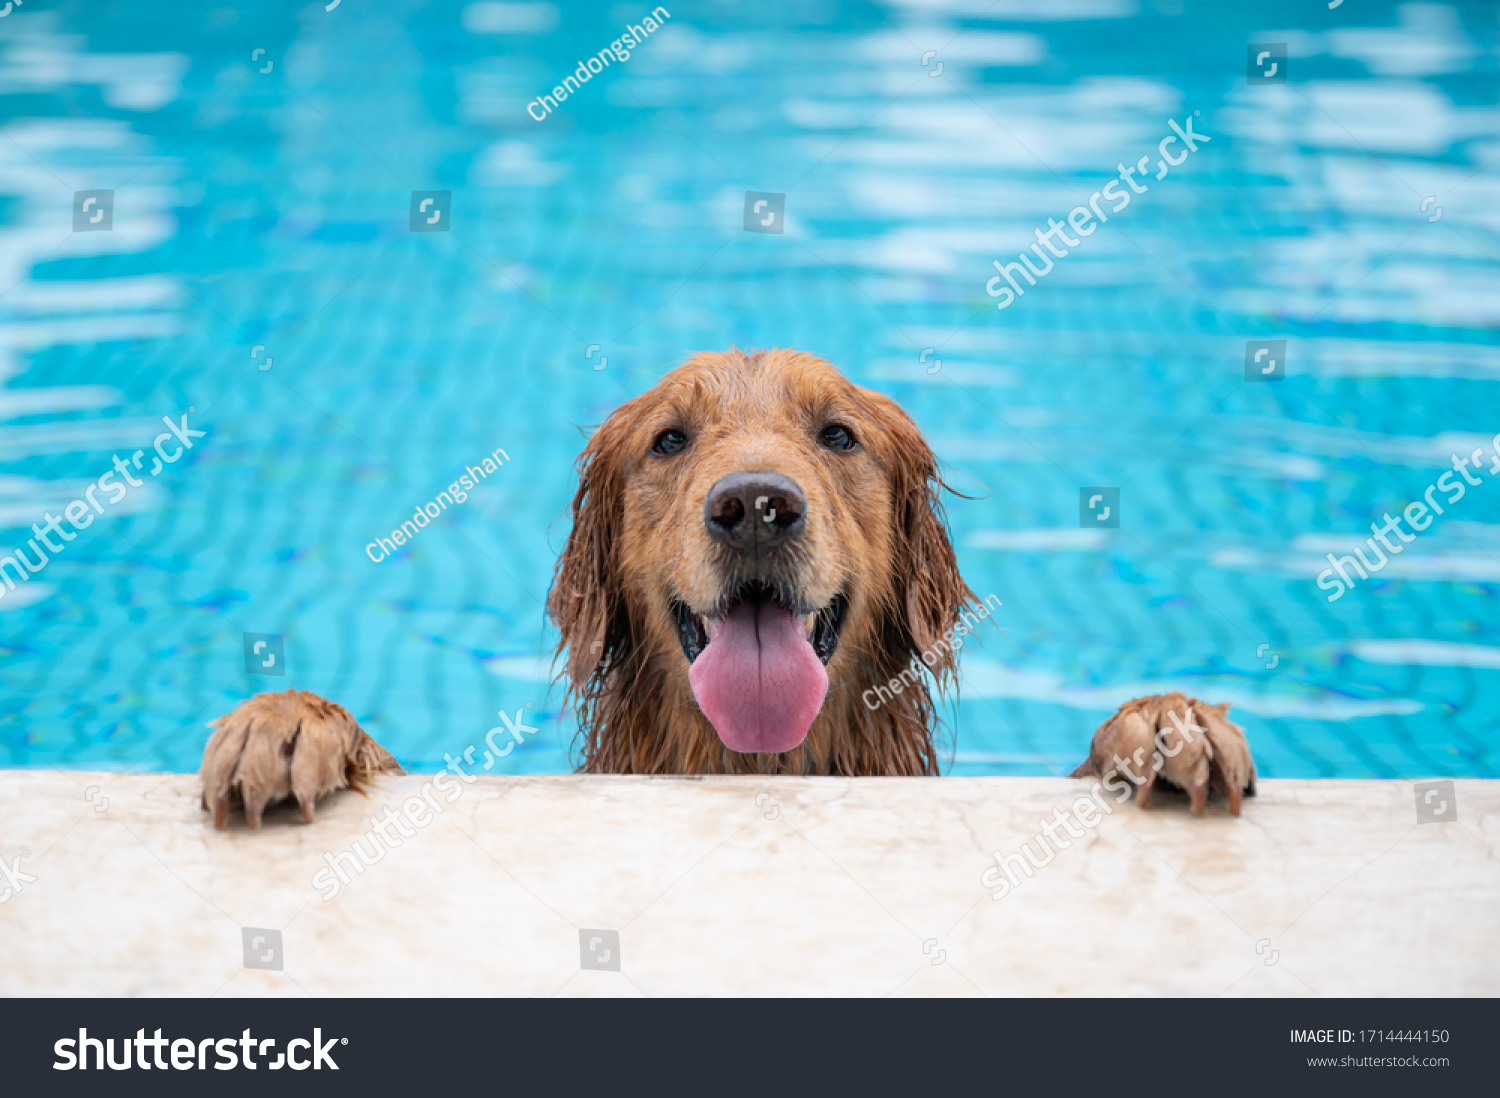 Golden retriever lying by the pool #1714444150